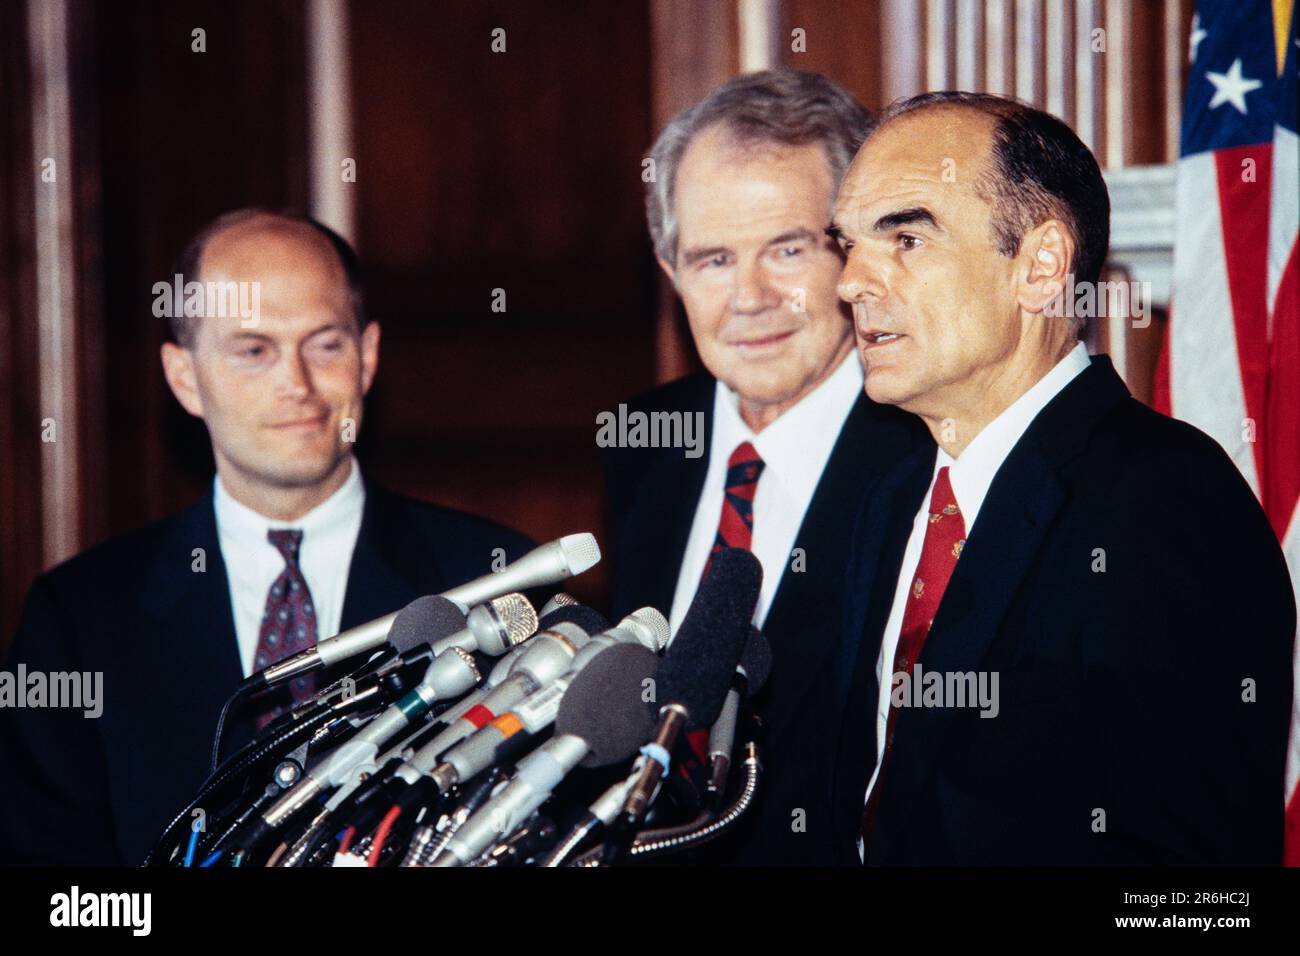 Washington, United States. 11 June, 1997. Former Interior Secretary Don Hodel, remarks during a press conference announcing he will replace founder Pat Robertson, center, as the president of the Christian Coalition on Capitol Hill, June 11, 1997 in Washington, D.C. Rep. Randy Tate, left, will become the new Executive Director of the lobbyist group. Credit: Richard Ellis/Richard Ellis/Alamy Live News Stock Photo